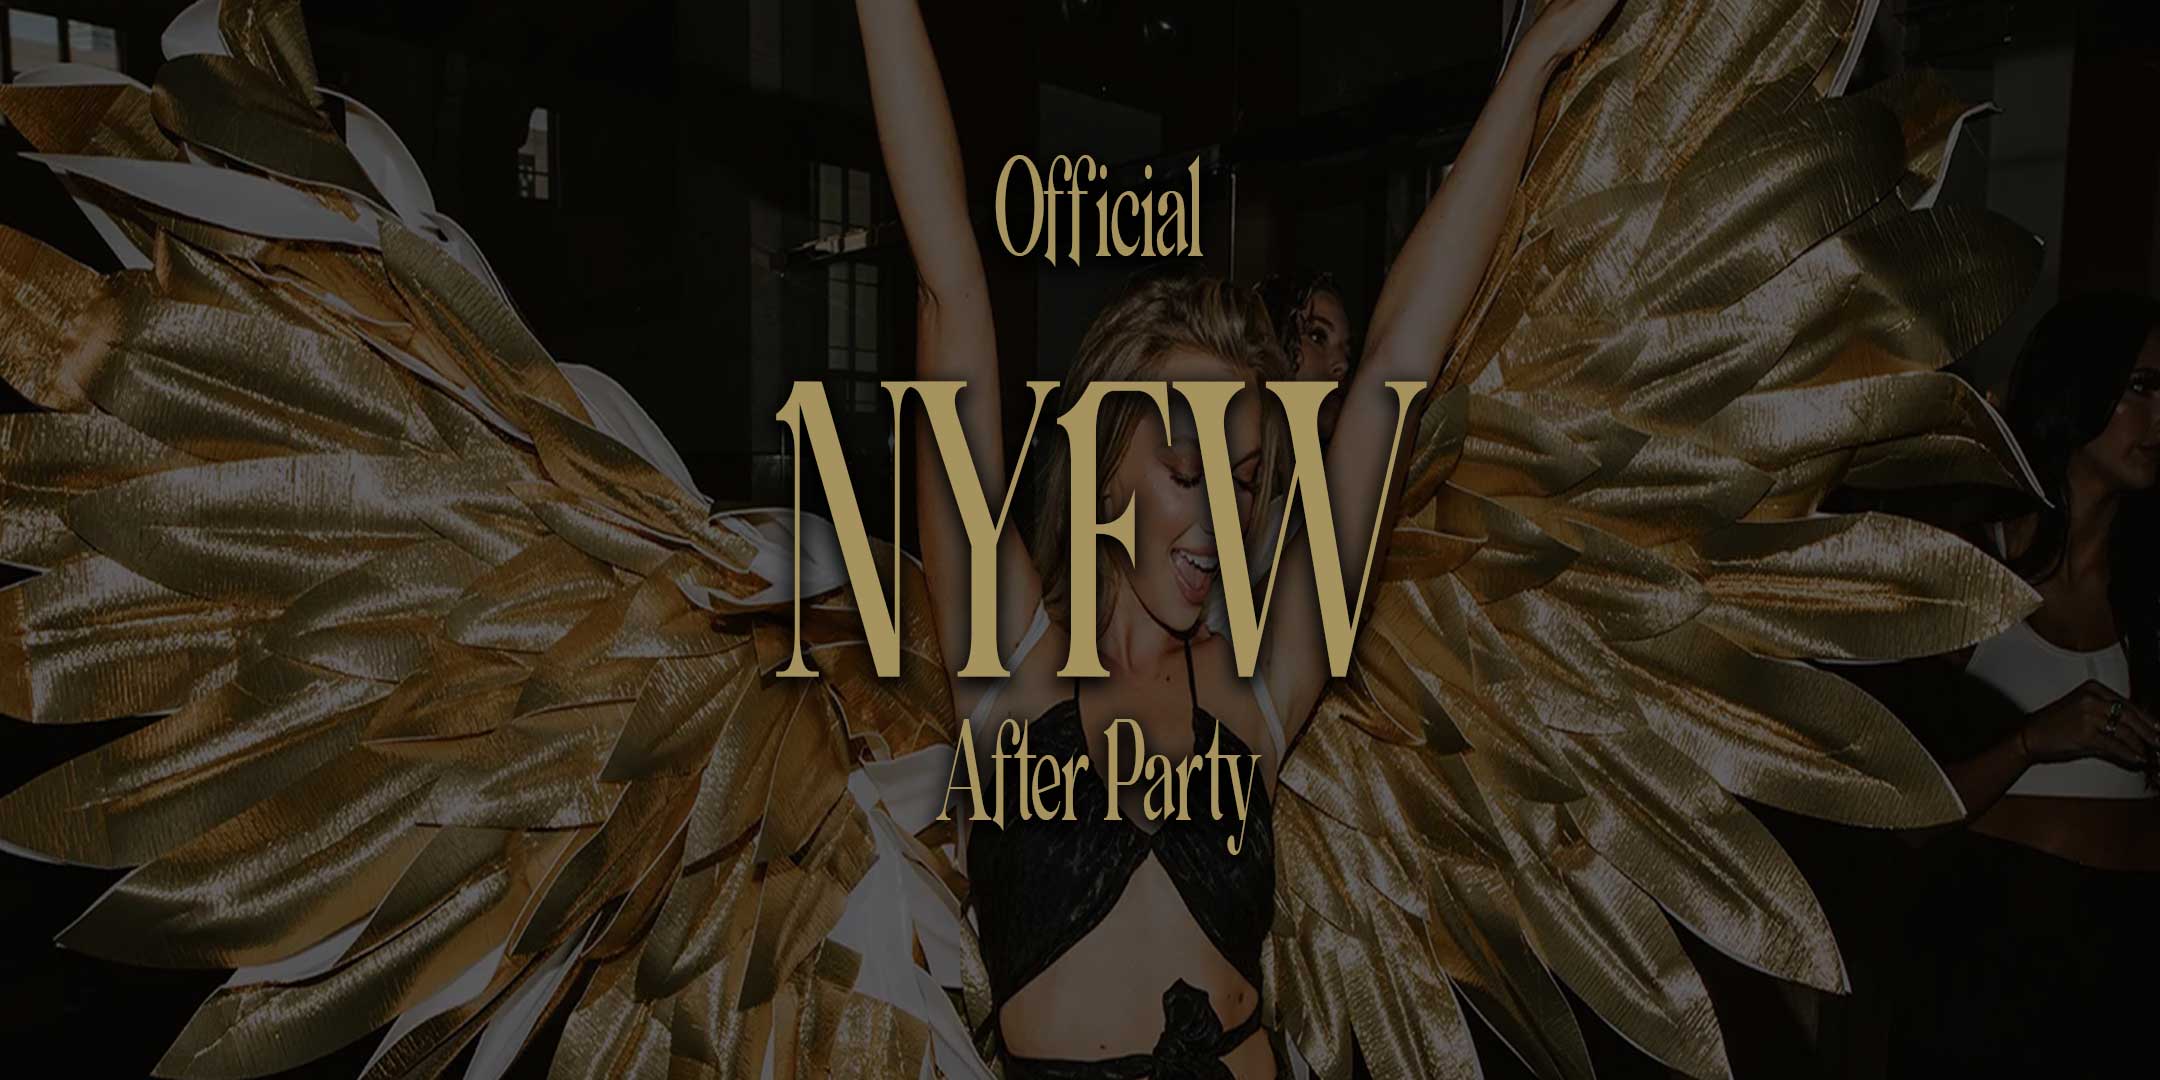 Official NYFW After Party Tickets